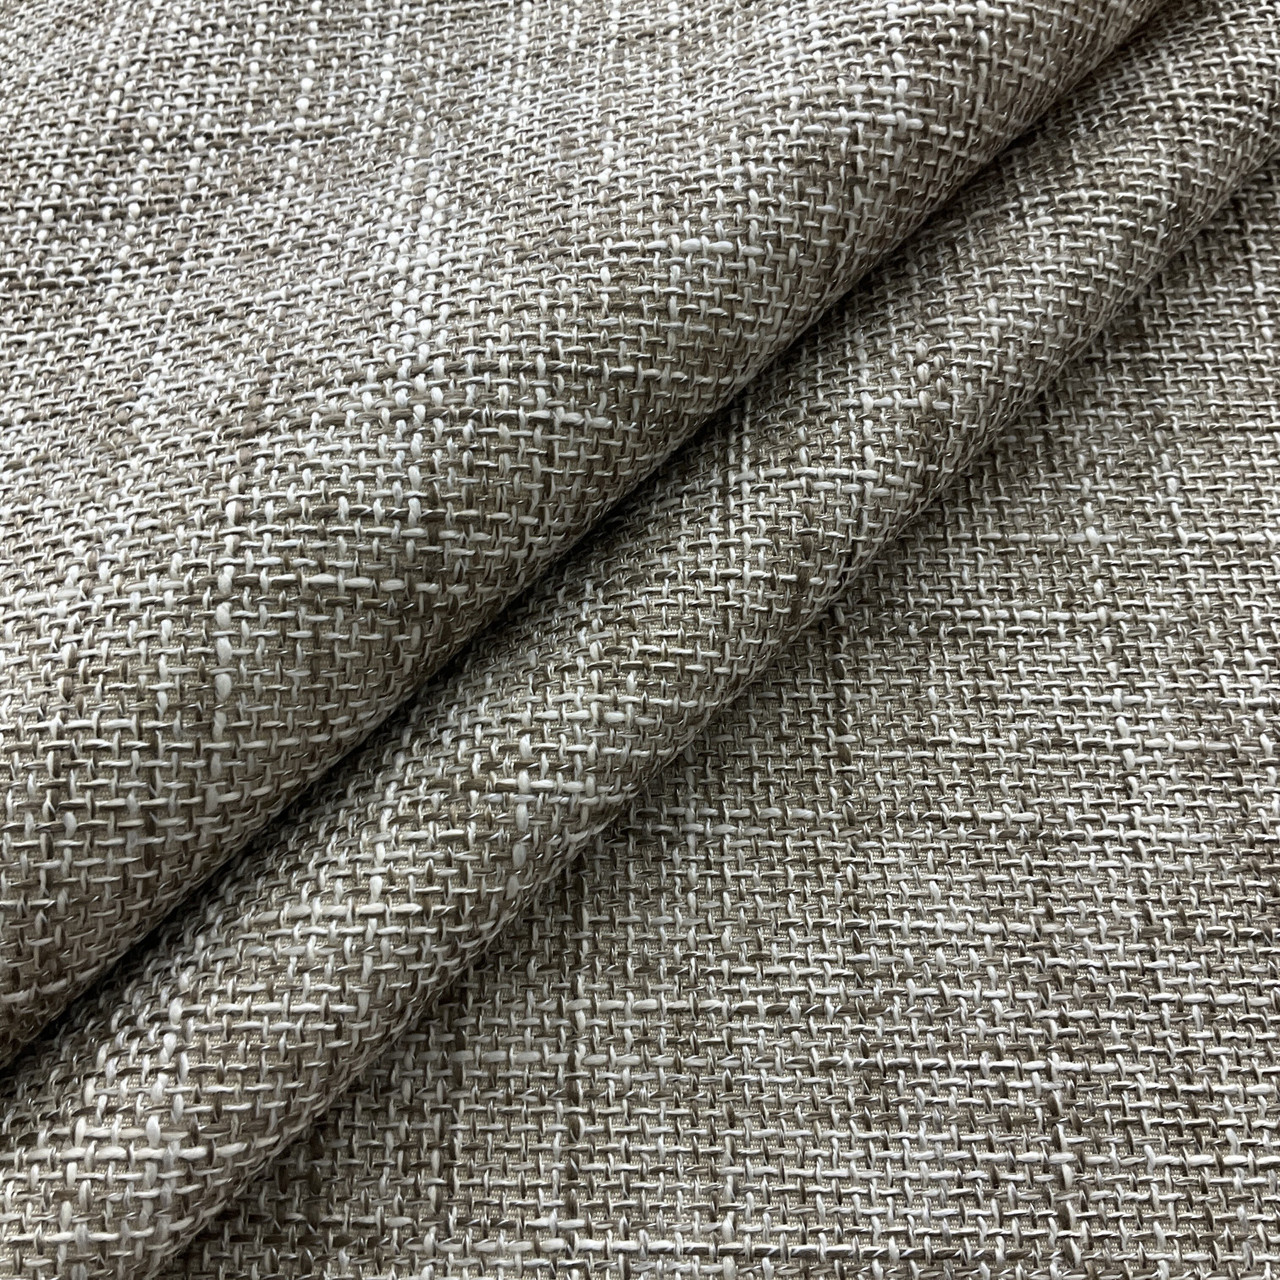 Warm Gray Basketwoven Polyester and Cotton Home Decor Fabric - Drapery  Fabrics - Home Decor - Applications